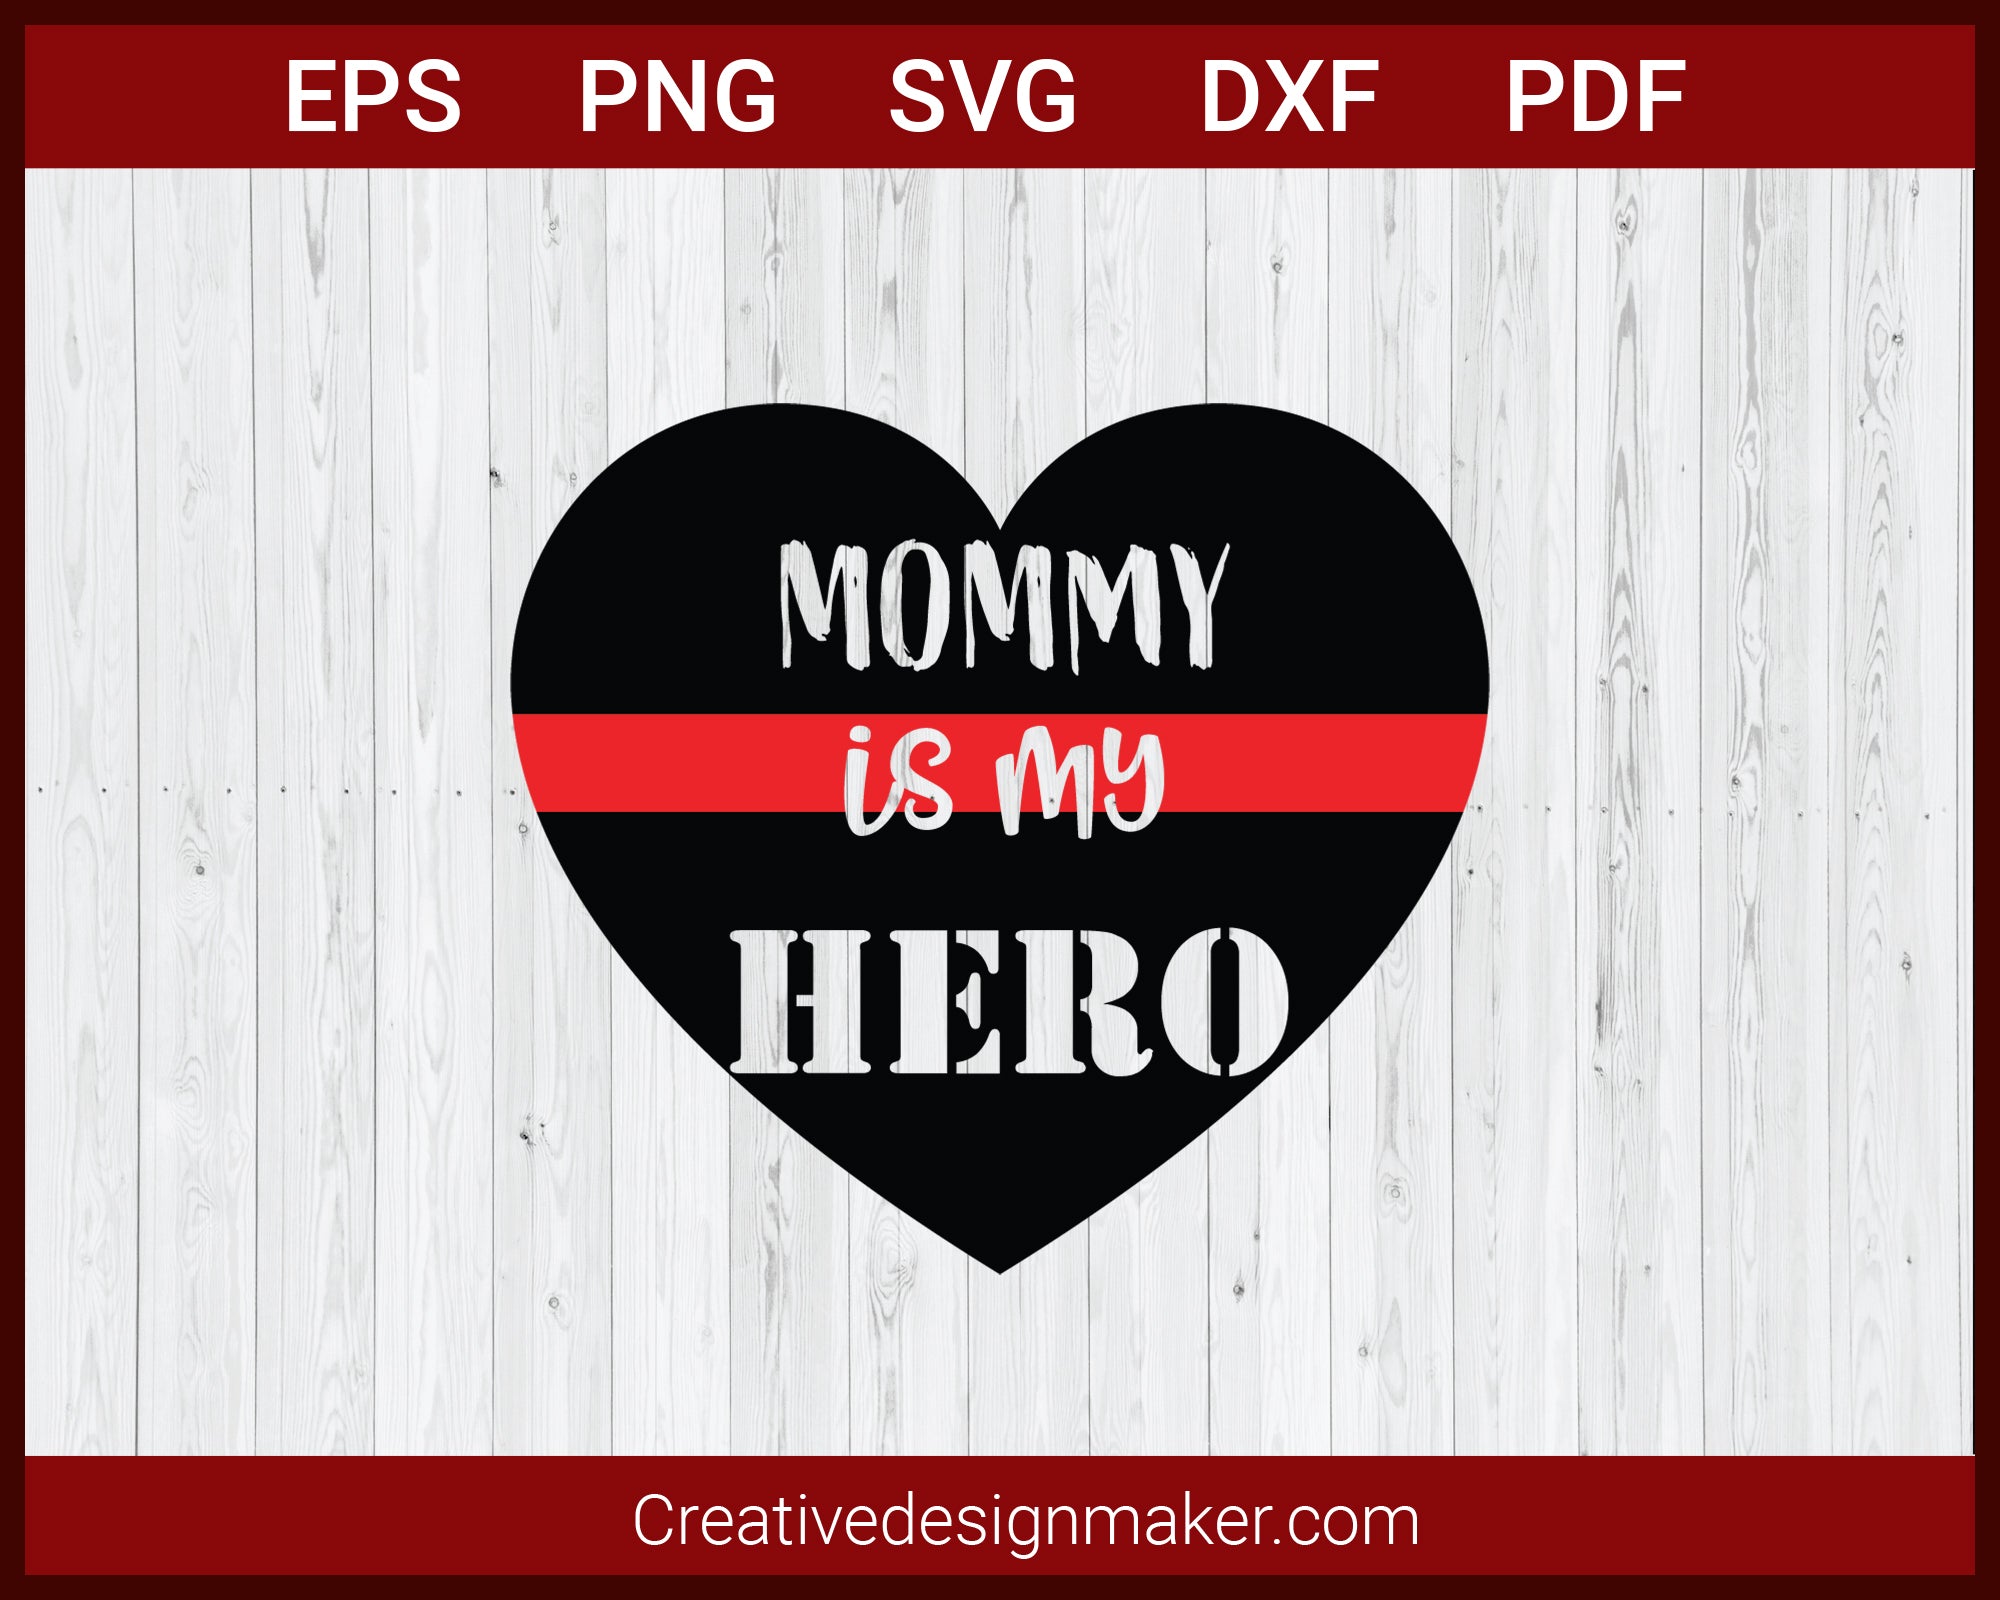 Mummy Is My Hero Fire Dept Red Line SVG Cricut Silhouette DXF PNG EPS Cut File